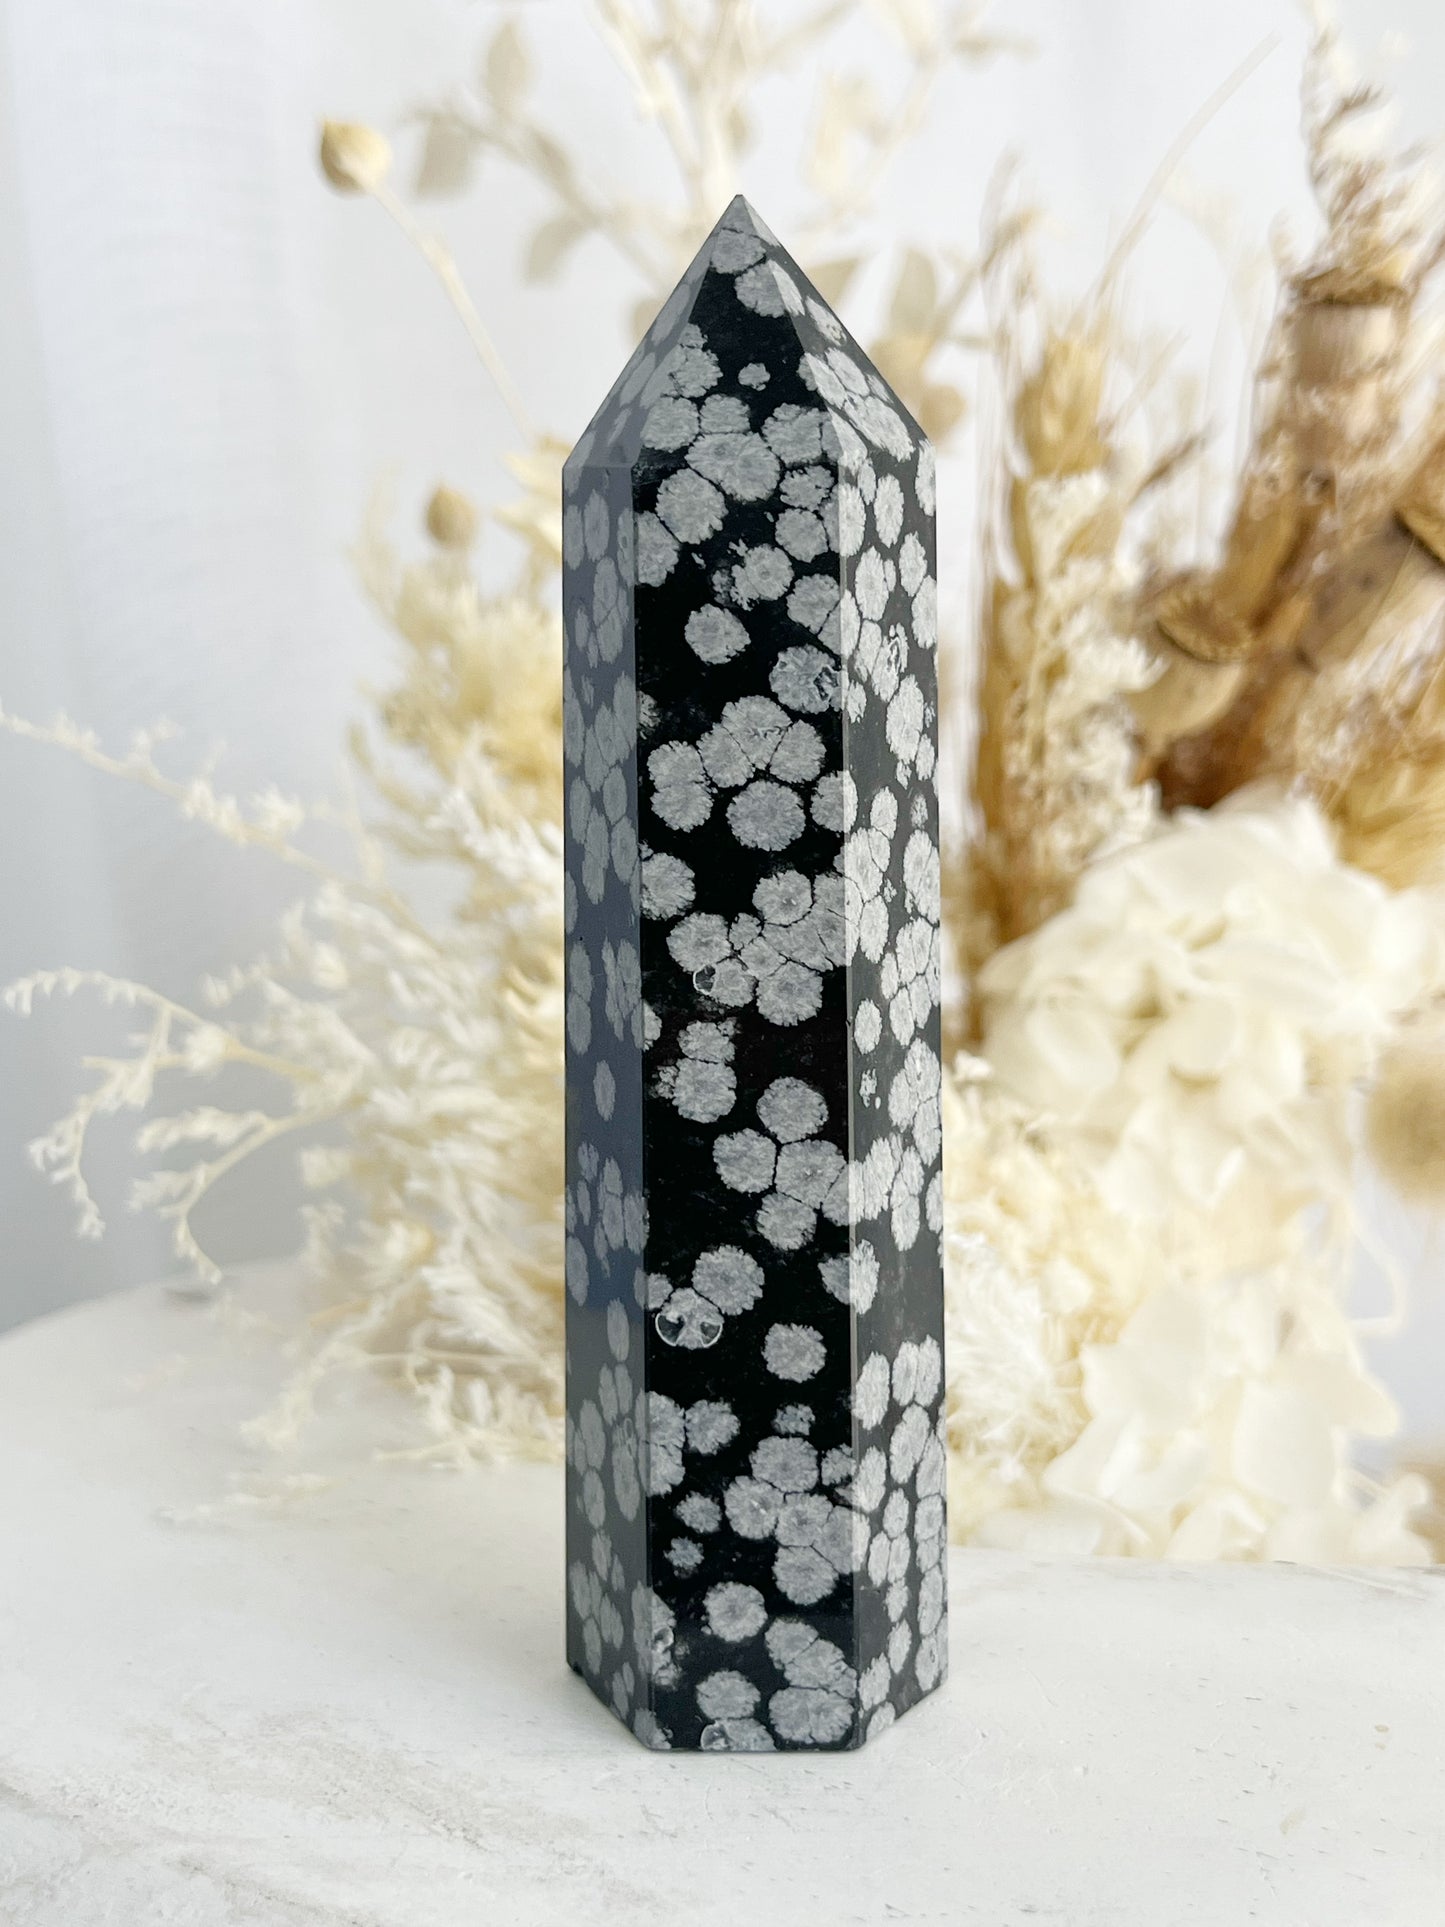 SNOWFLAKE OBSIDIAN GENERATOR TOWER, STONED AND SAGED CRYSTAL SHOP AUSTRALIA